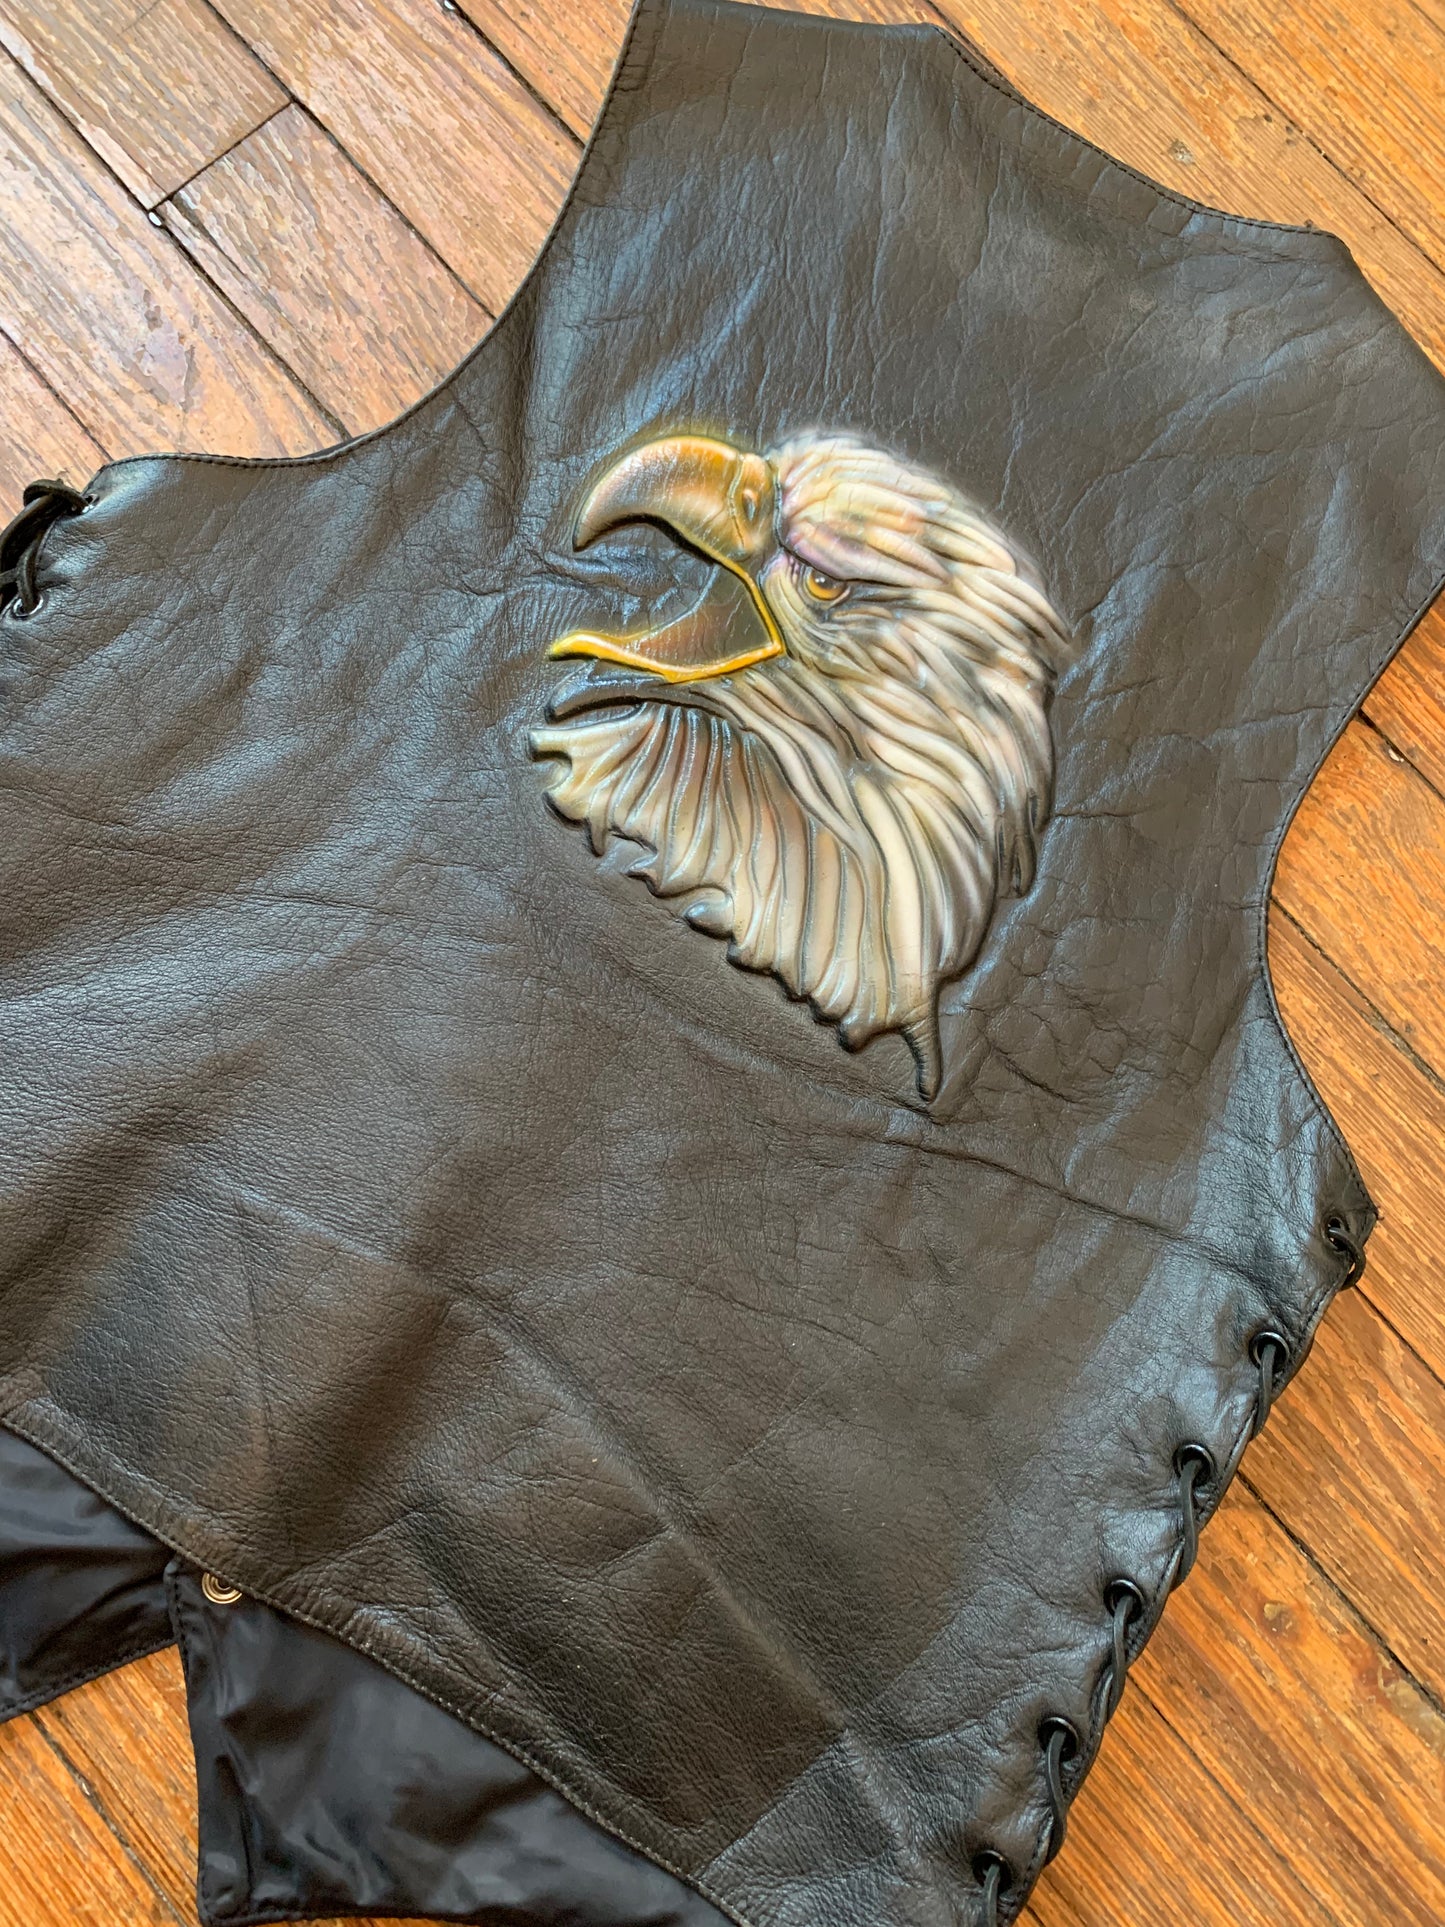 Wilson’s Leather Airbrushed Eagle Lace Up Vest